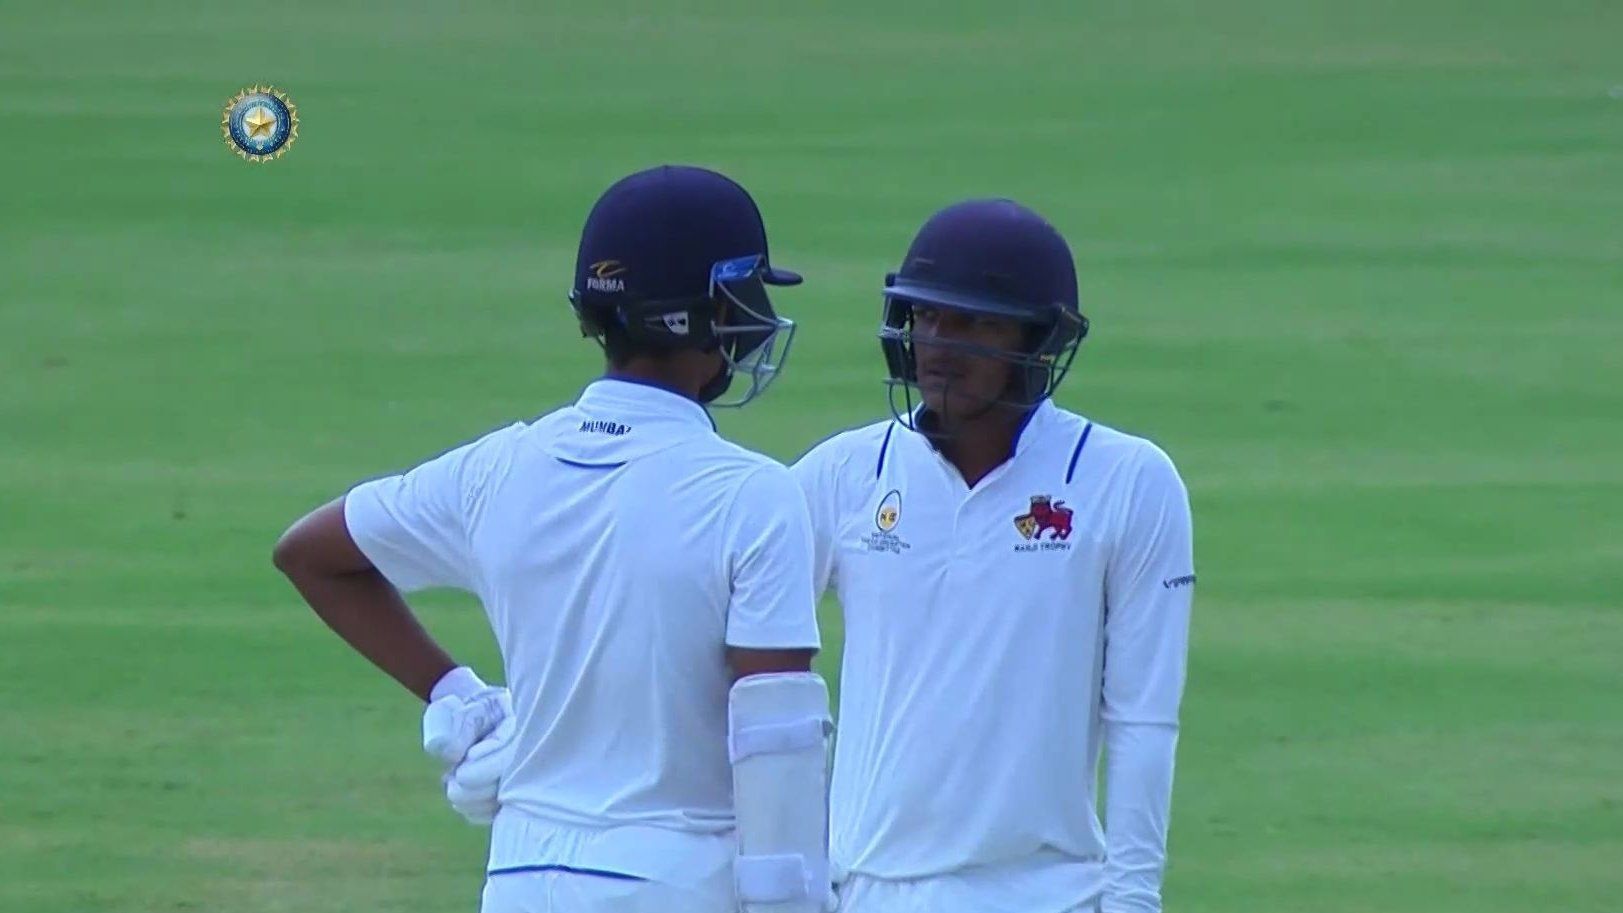 Yashasvi Jaiswal and Armaan Jaffer hit centuries in the second innings. Pic: BCCI